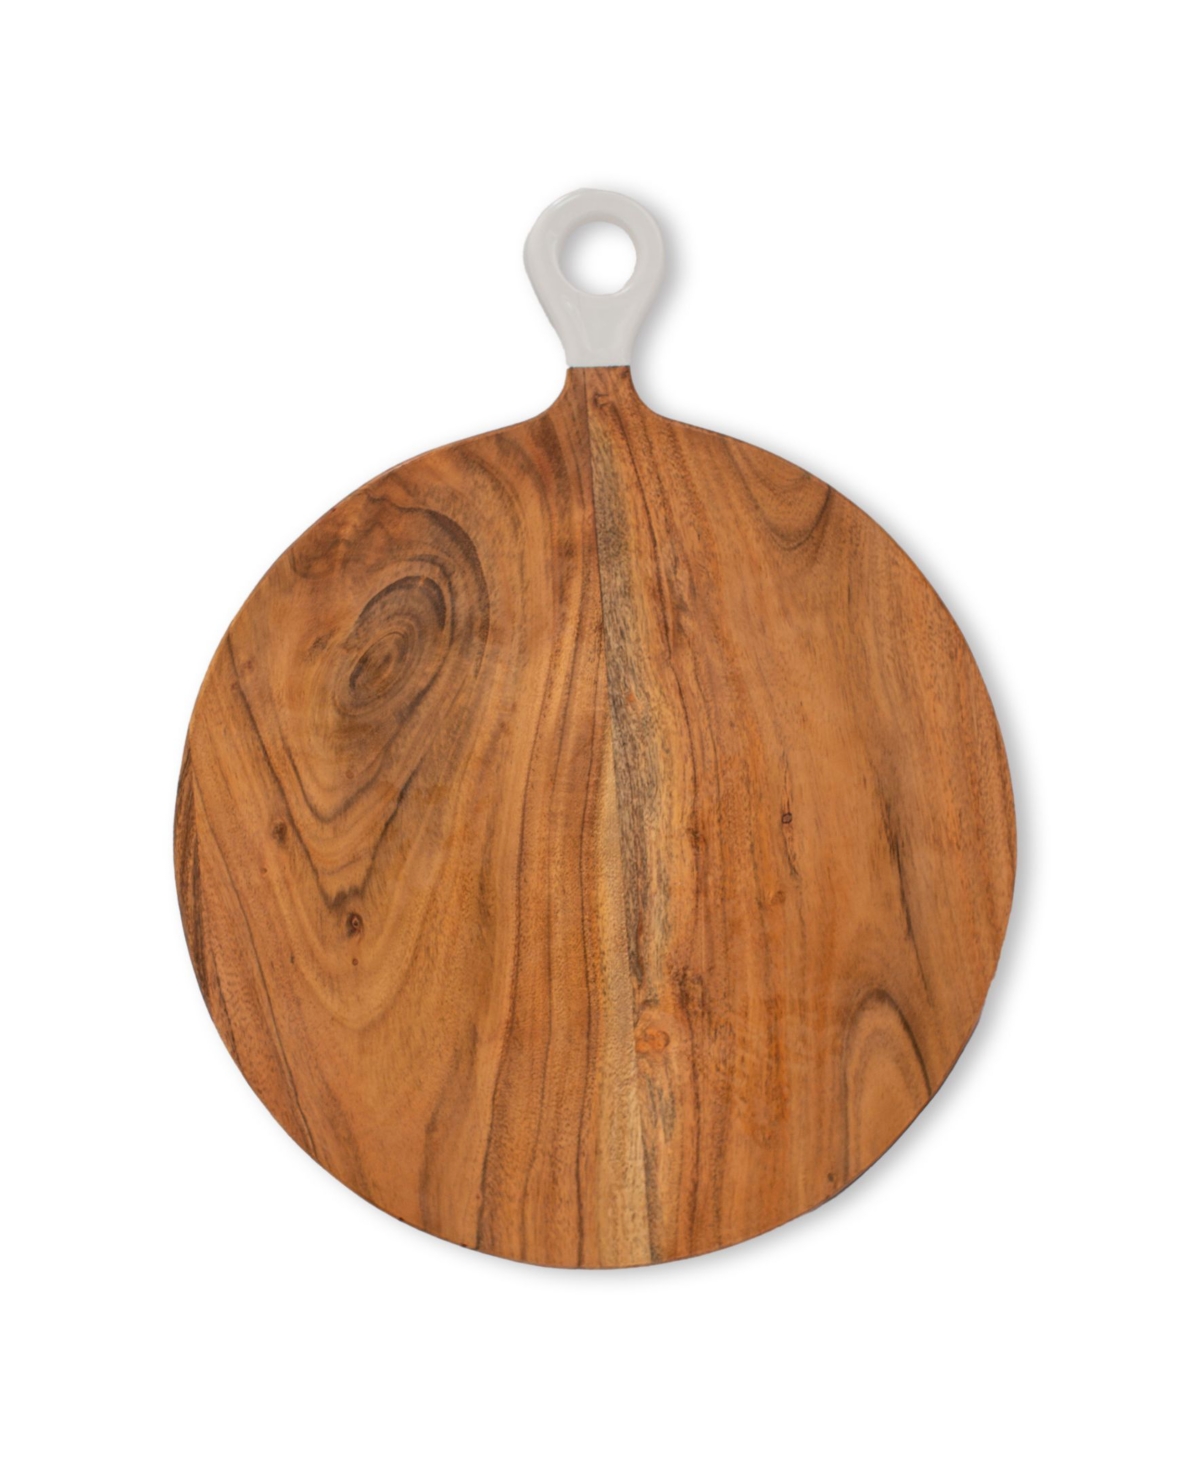 Jeanne Fitz Wood Plus White Collection Acacia Wood Round Charcuterie Board, Large In Brown And White